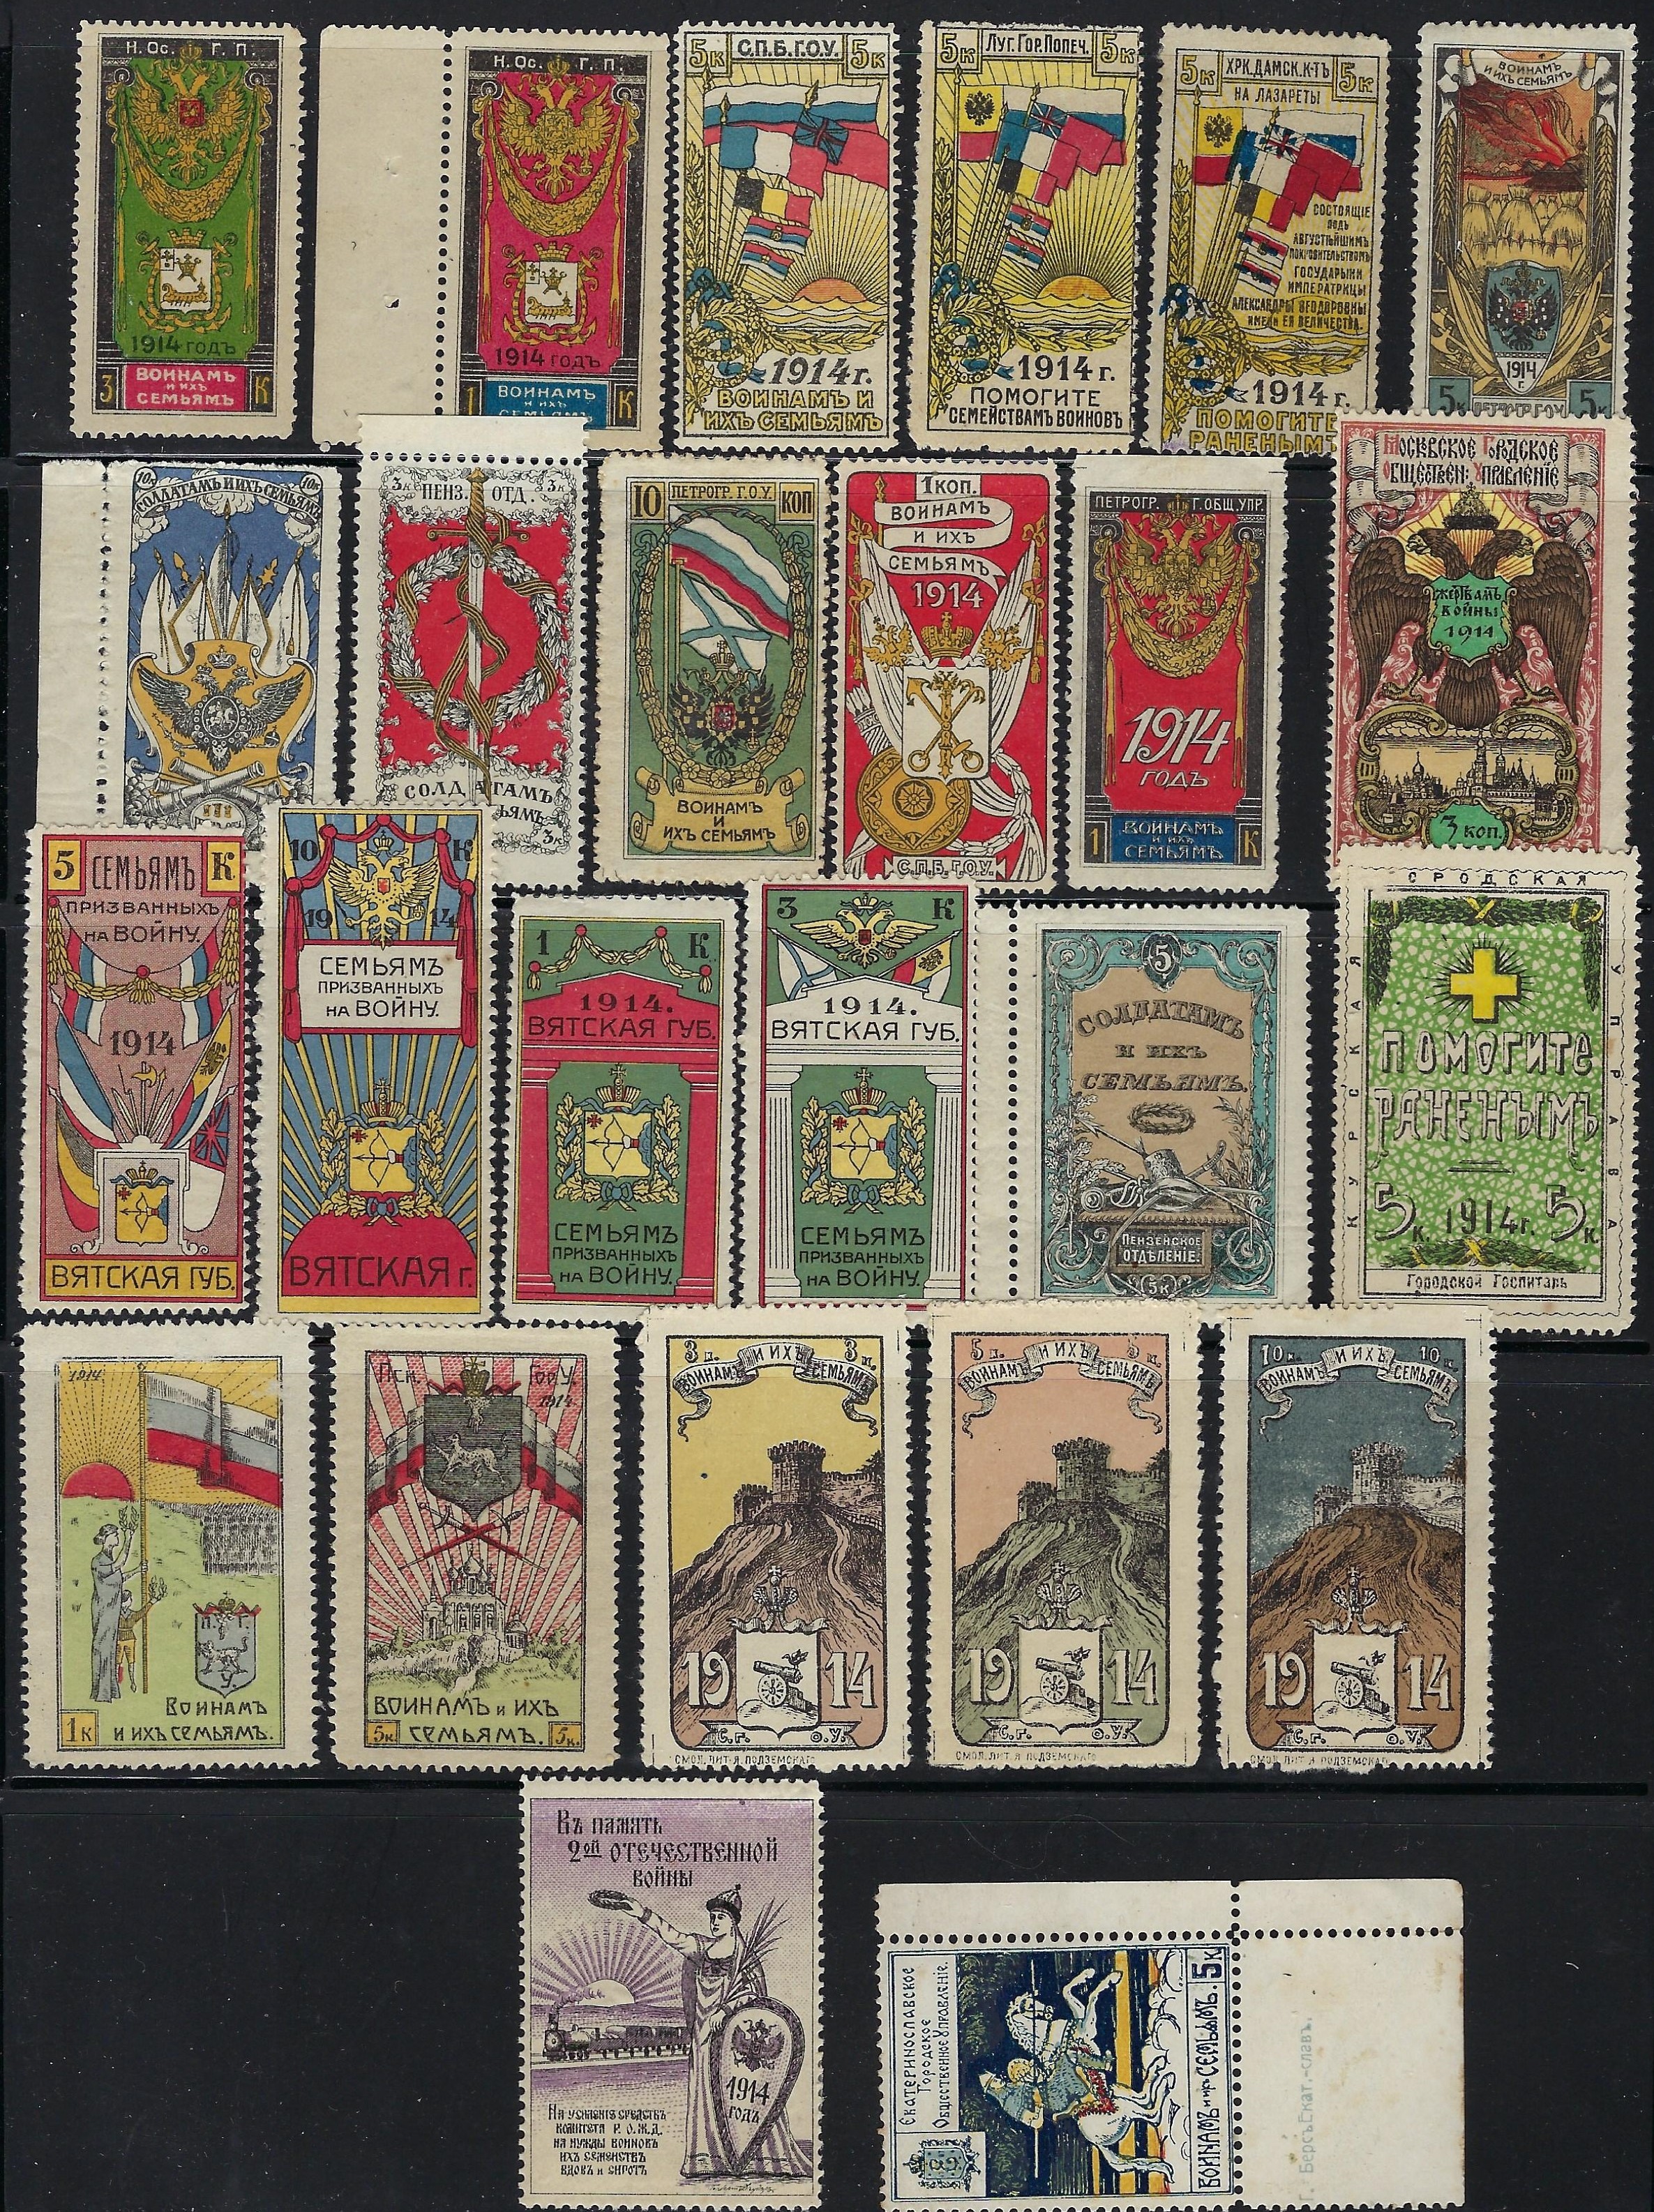 Russia Specialized - Postal Savings & Revenue Charity stamps Scott 6 